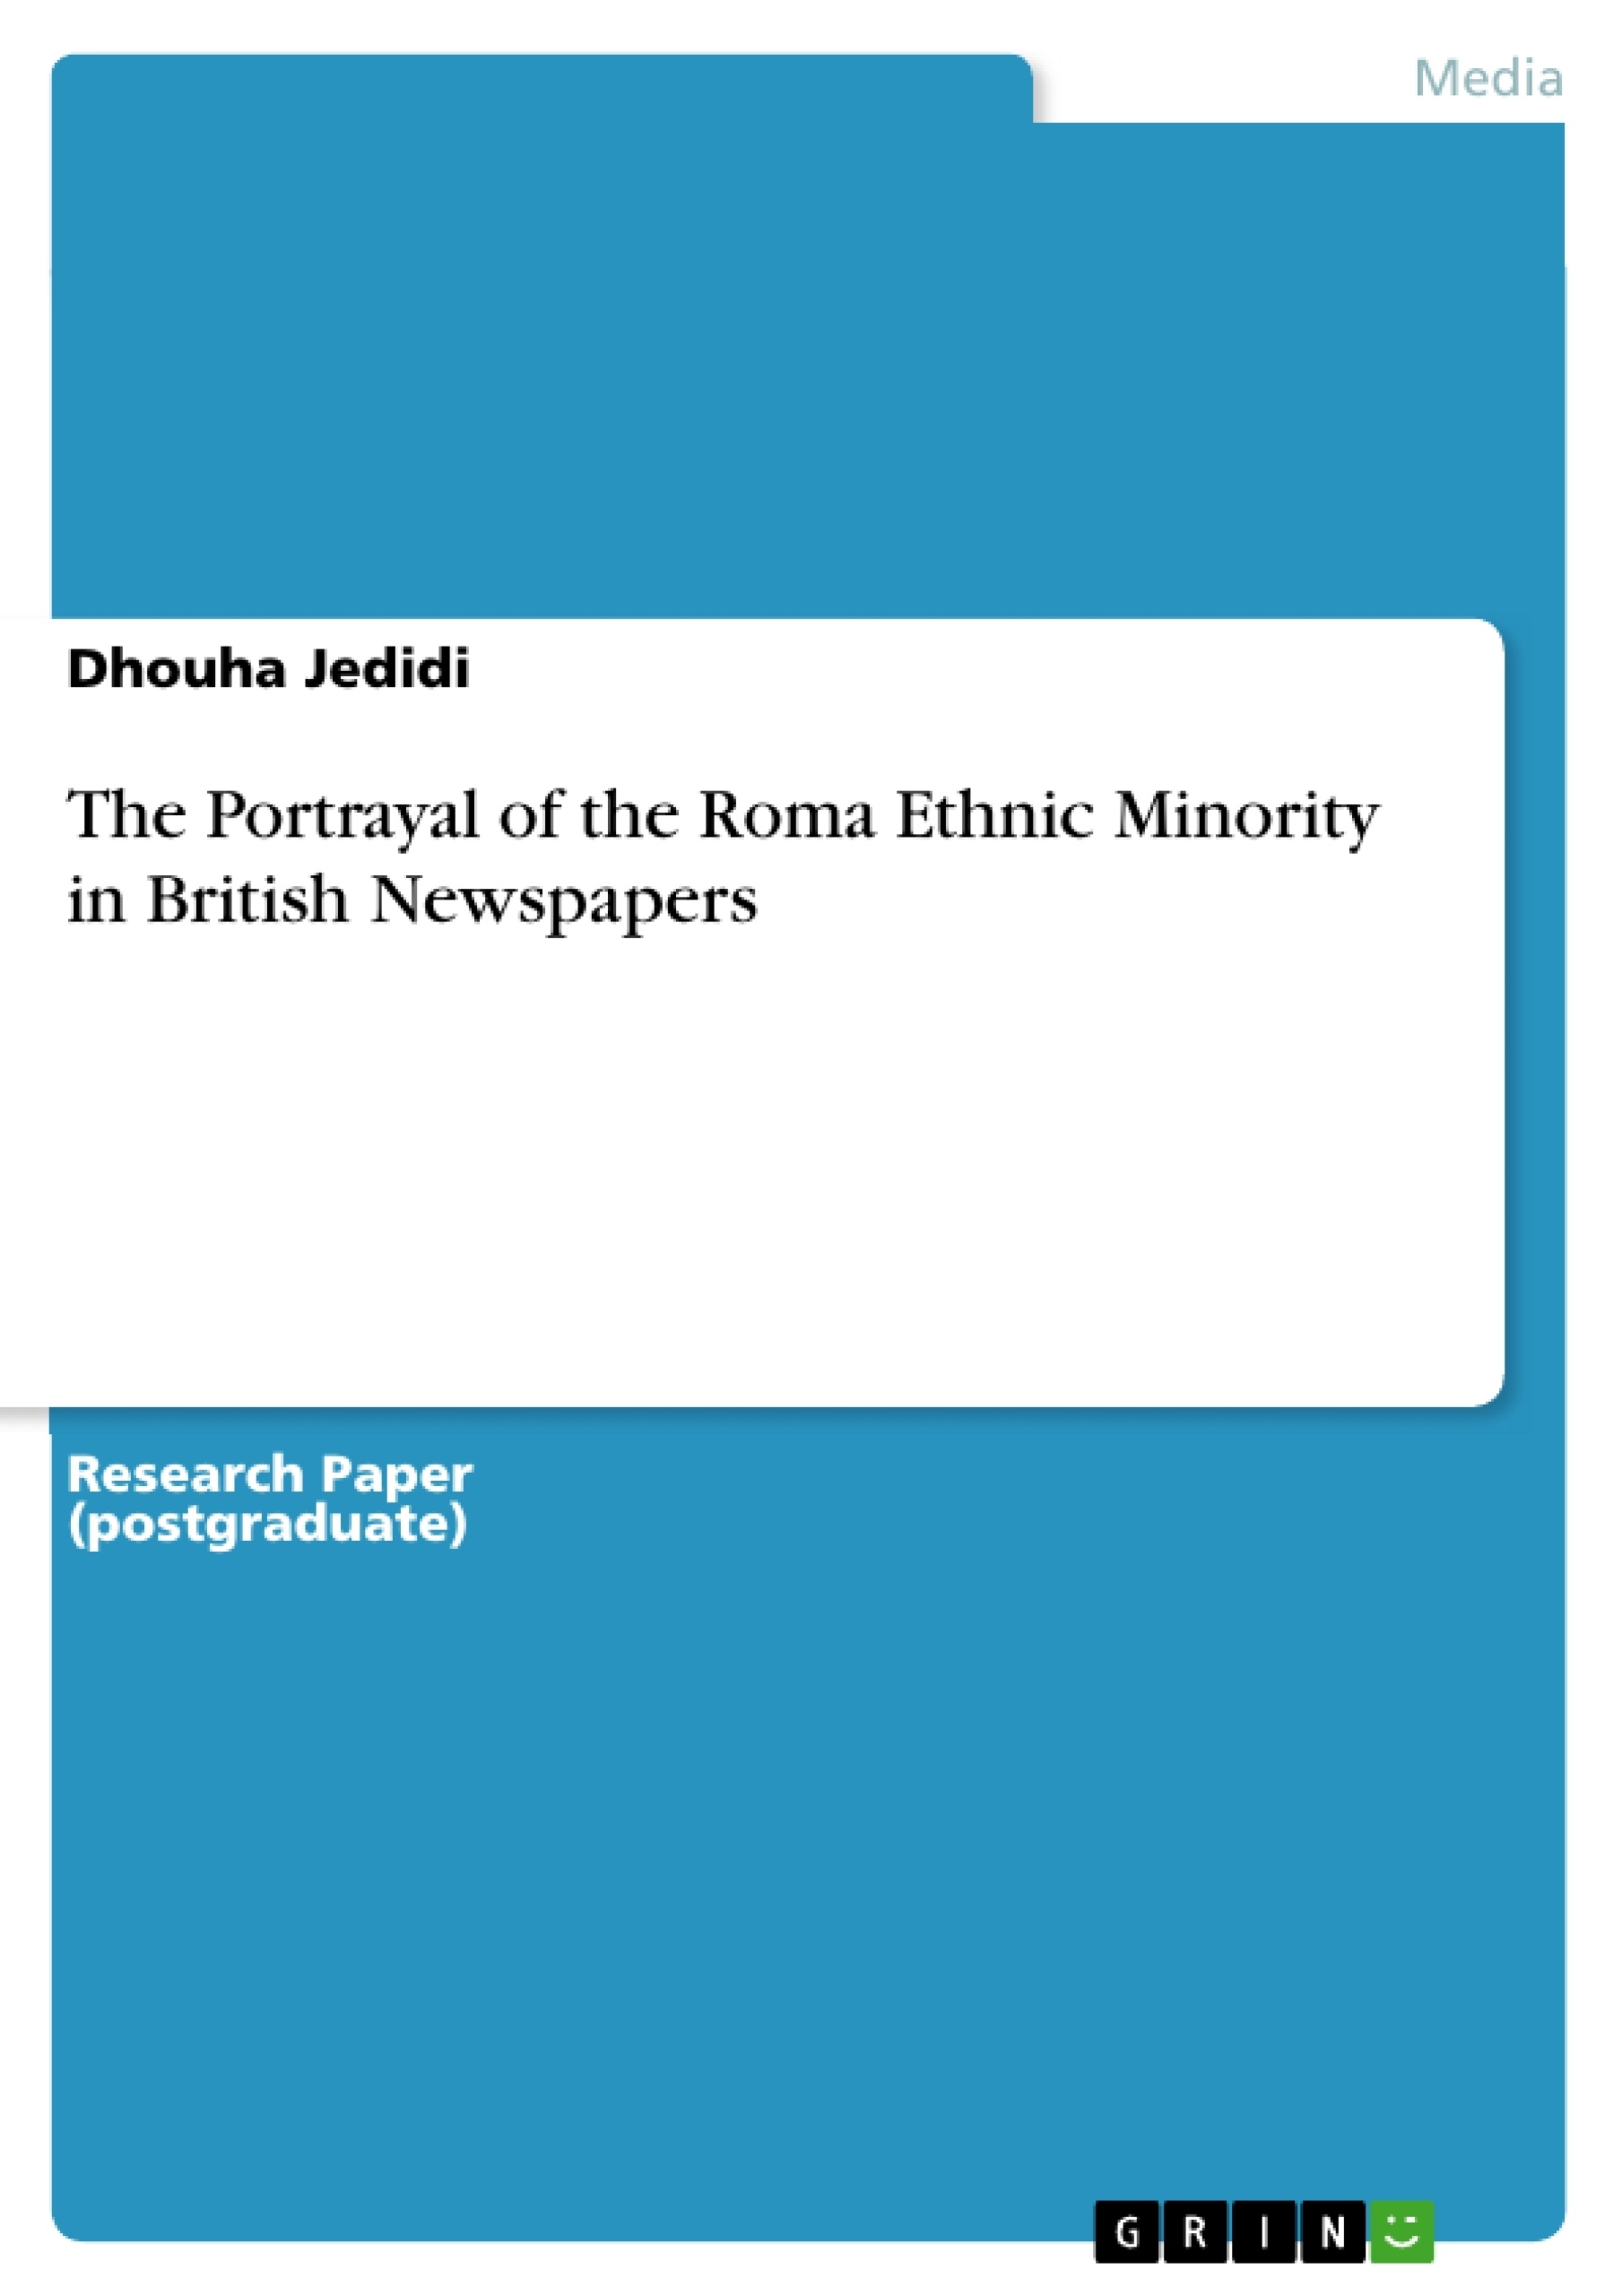 Título: The Portrayal of the Roma Ethnic Minority in British Newspapers